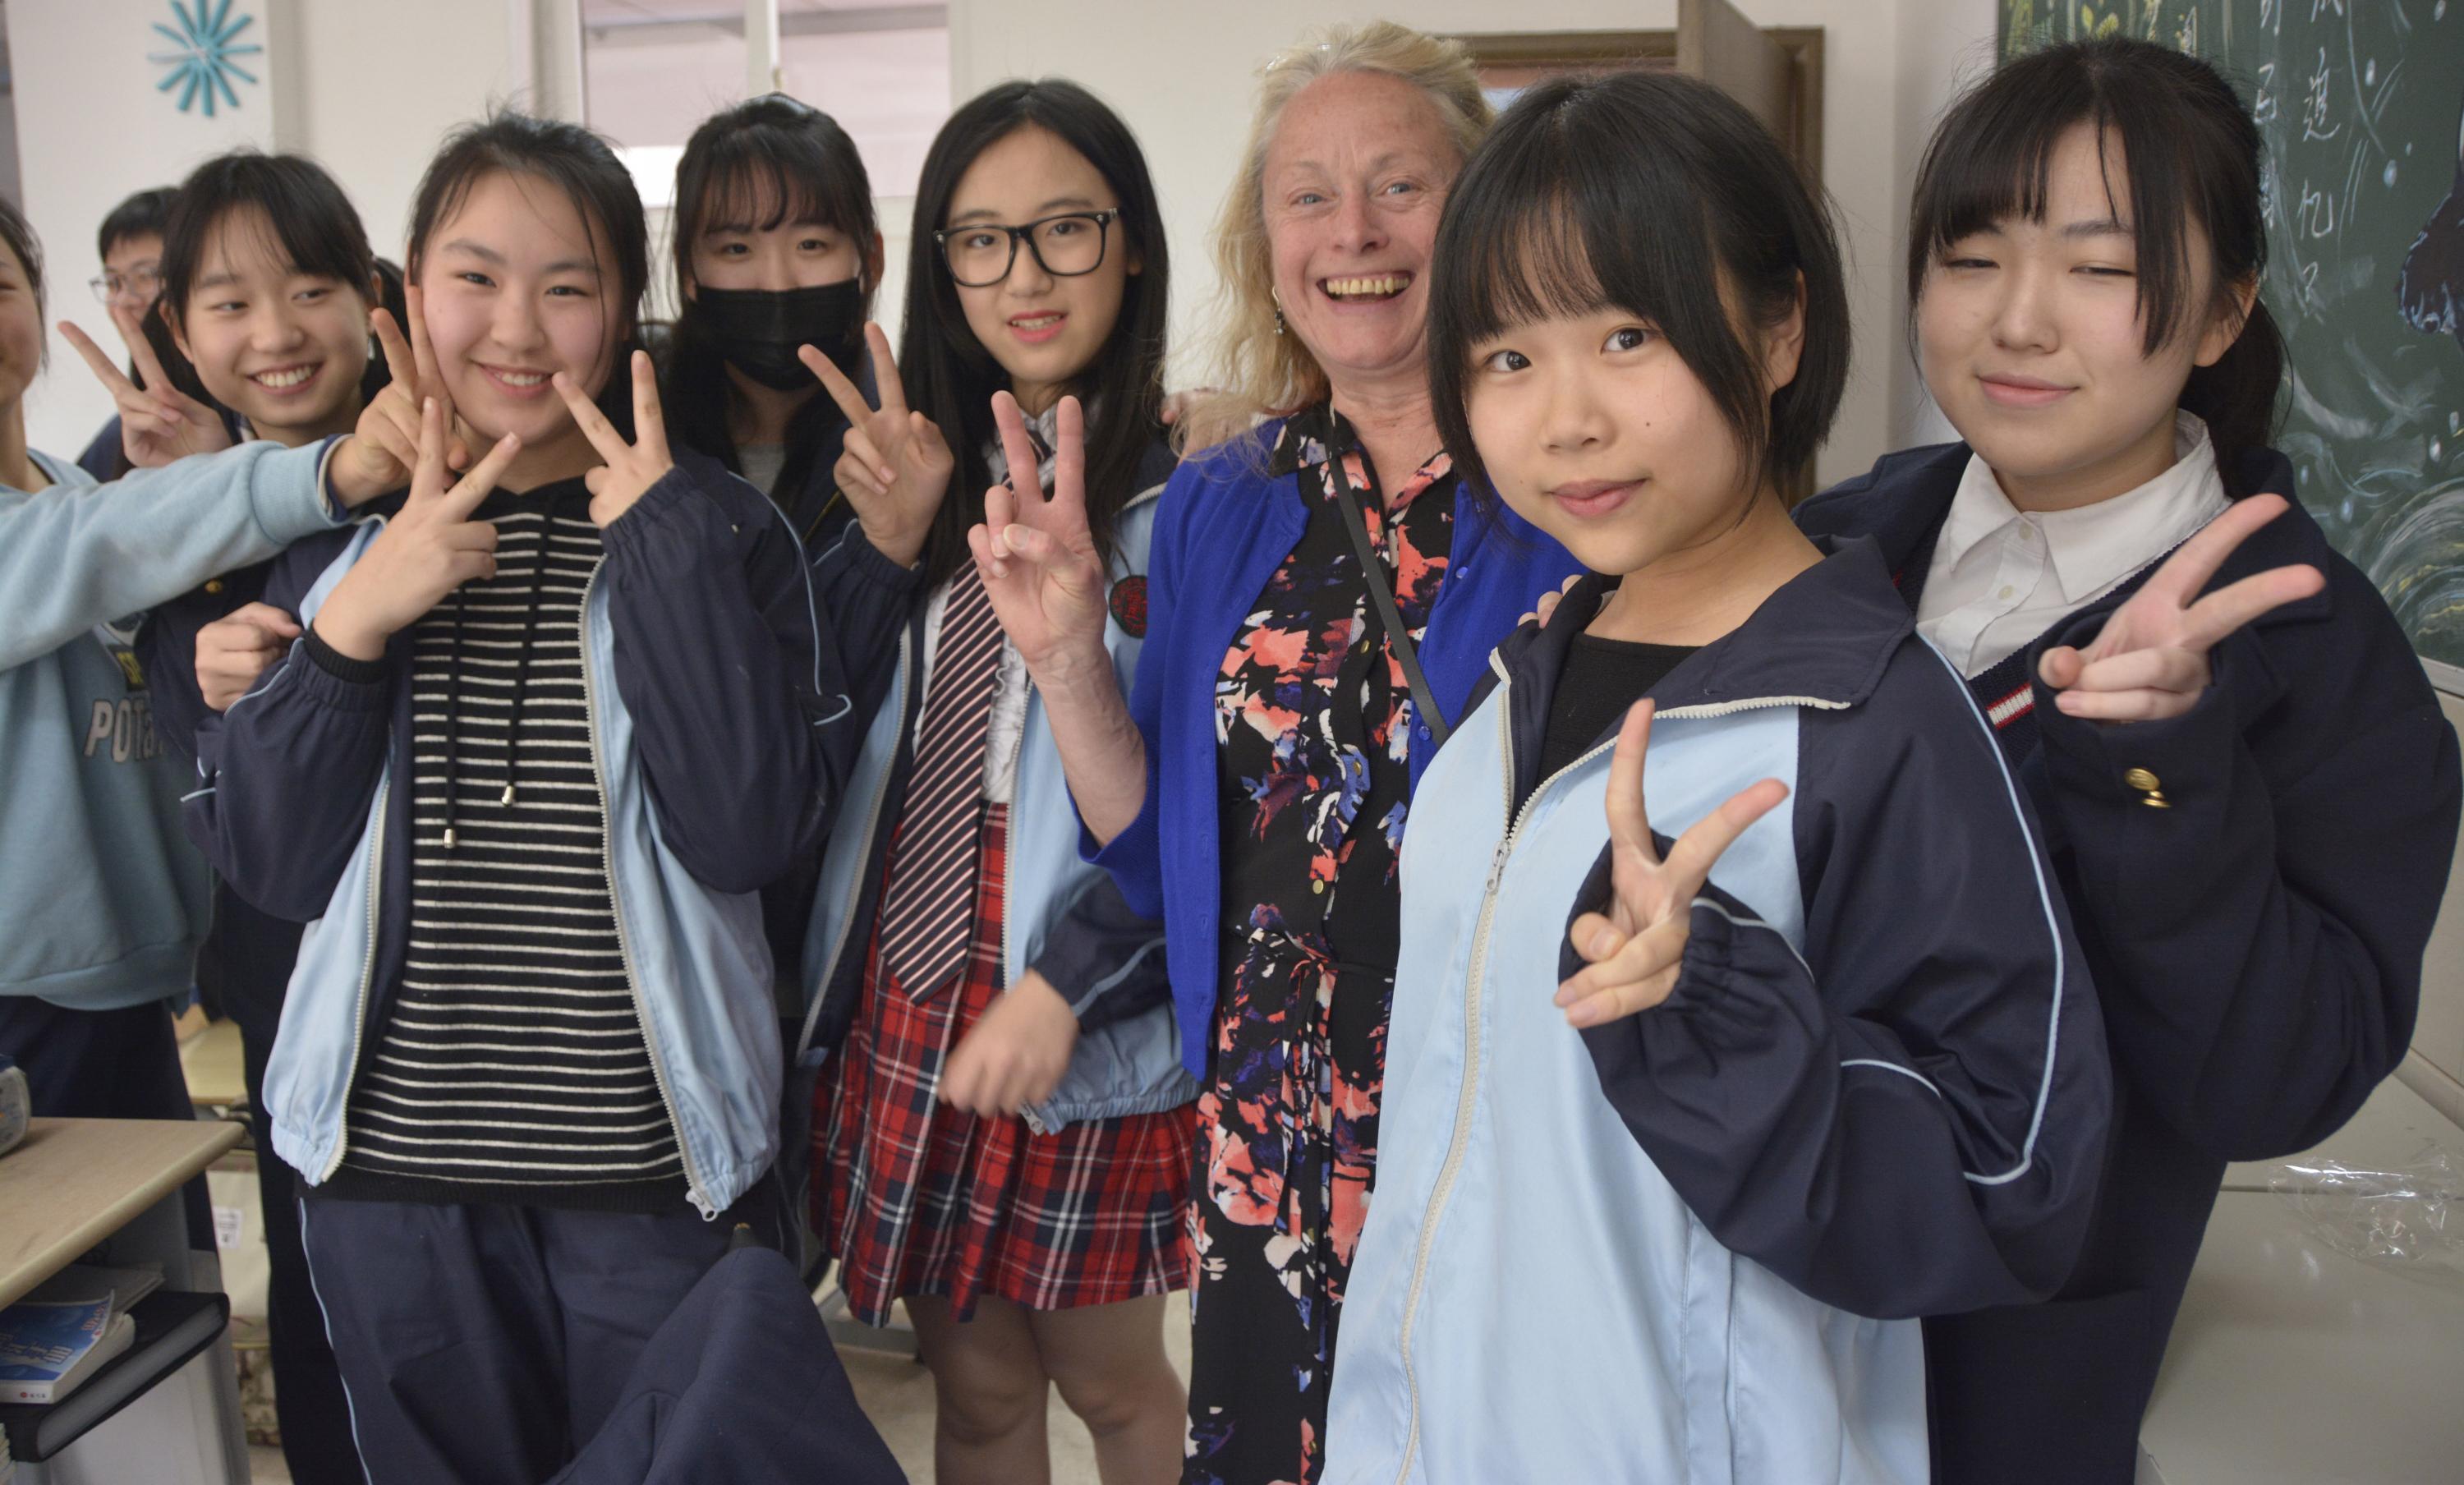 An educator on the field study to China poses for a photo with a group of students from Shaanxi Normal University.